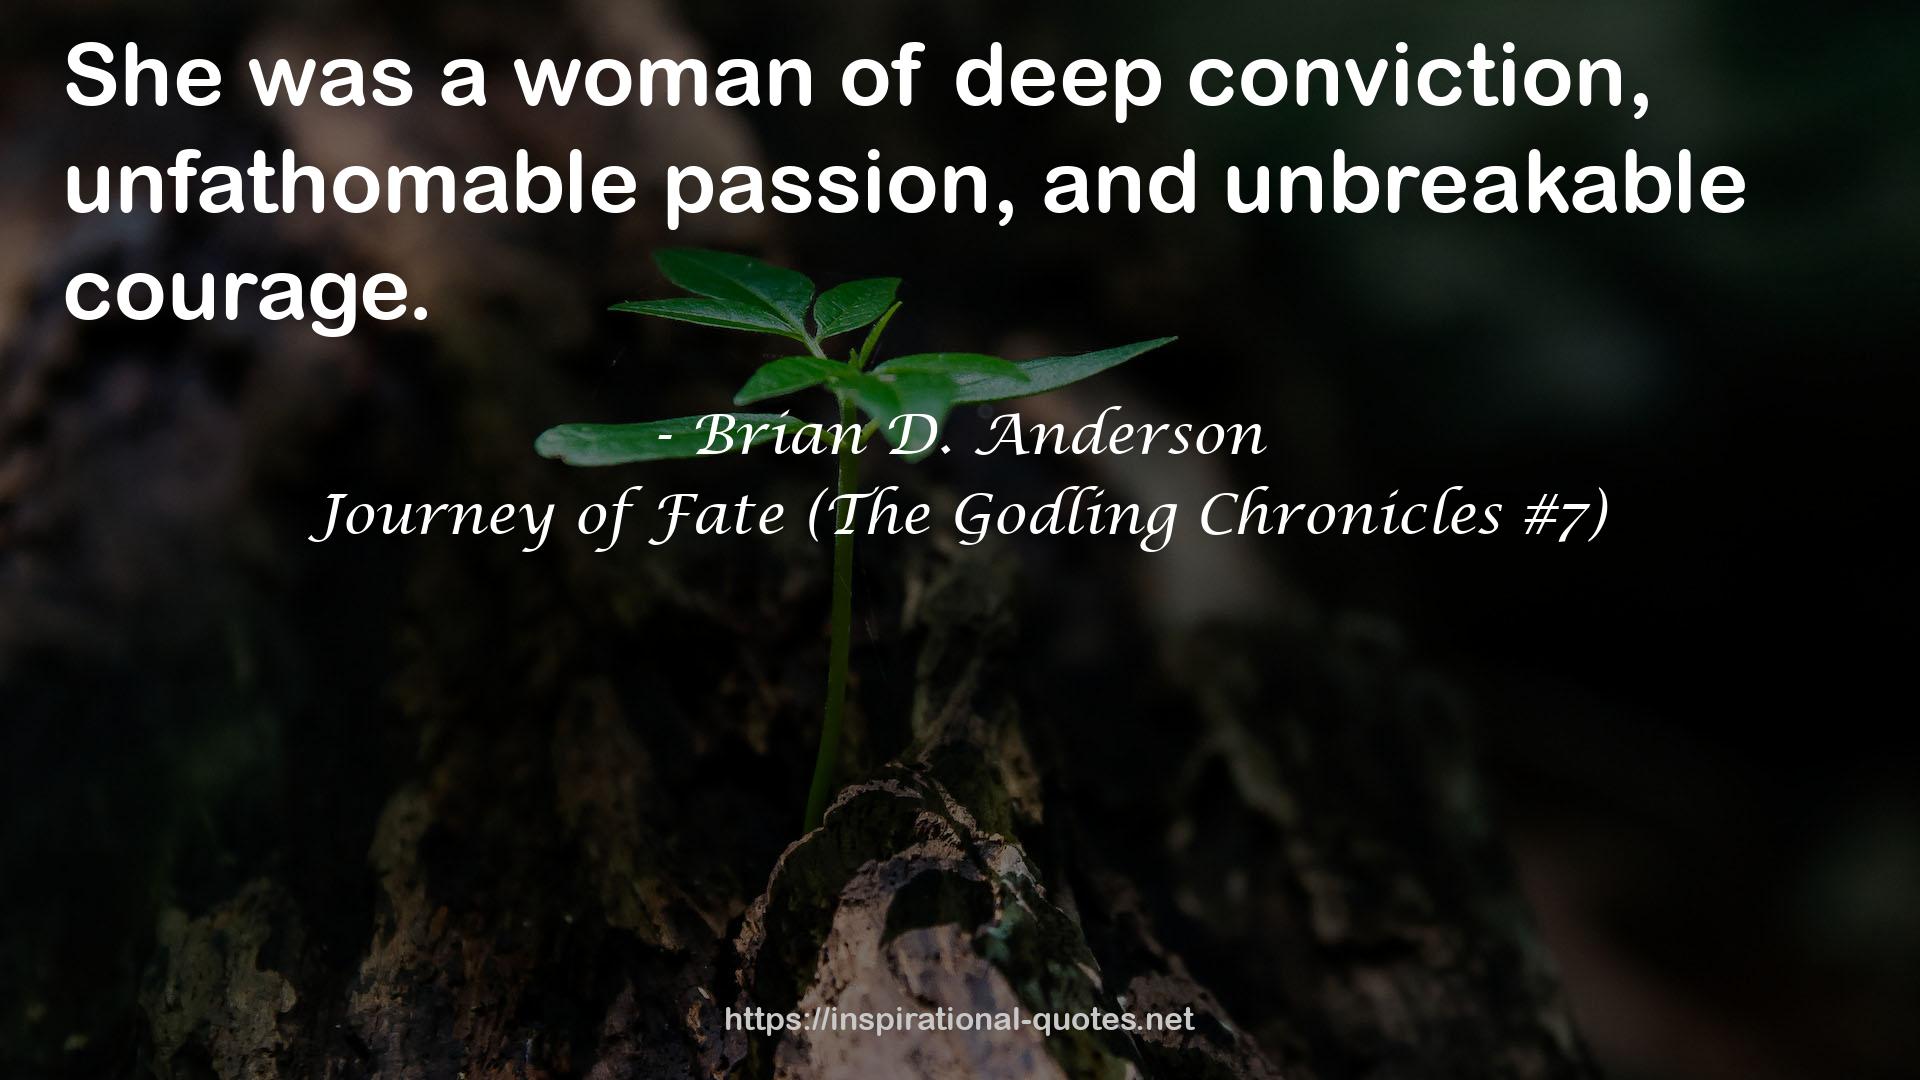 Journey of Fate (The Godling Chronicles #7) QUOTES